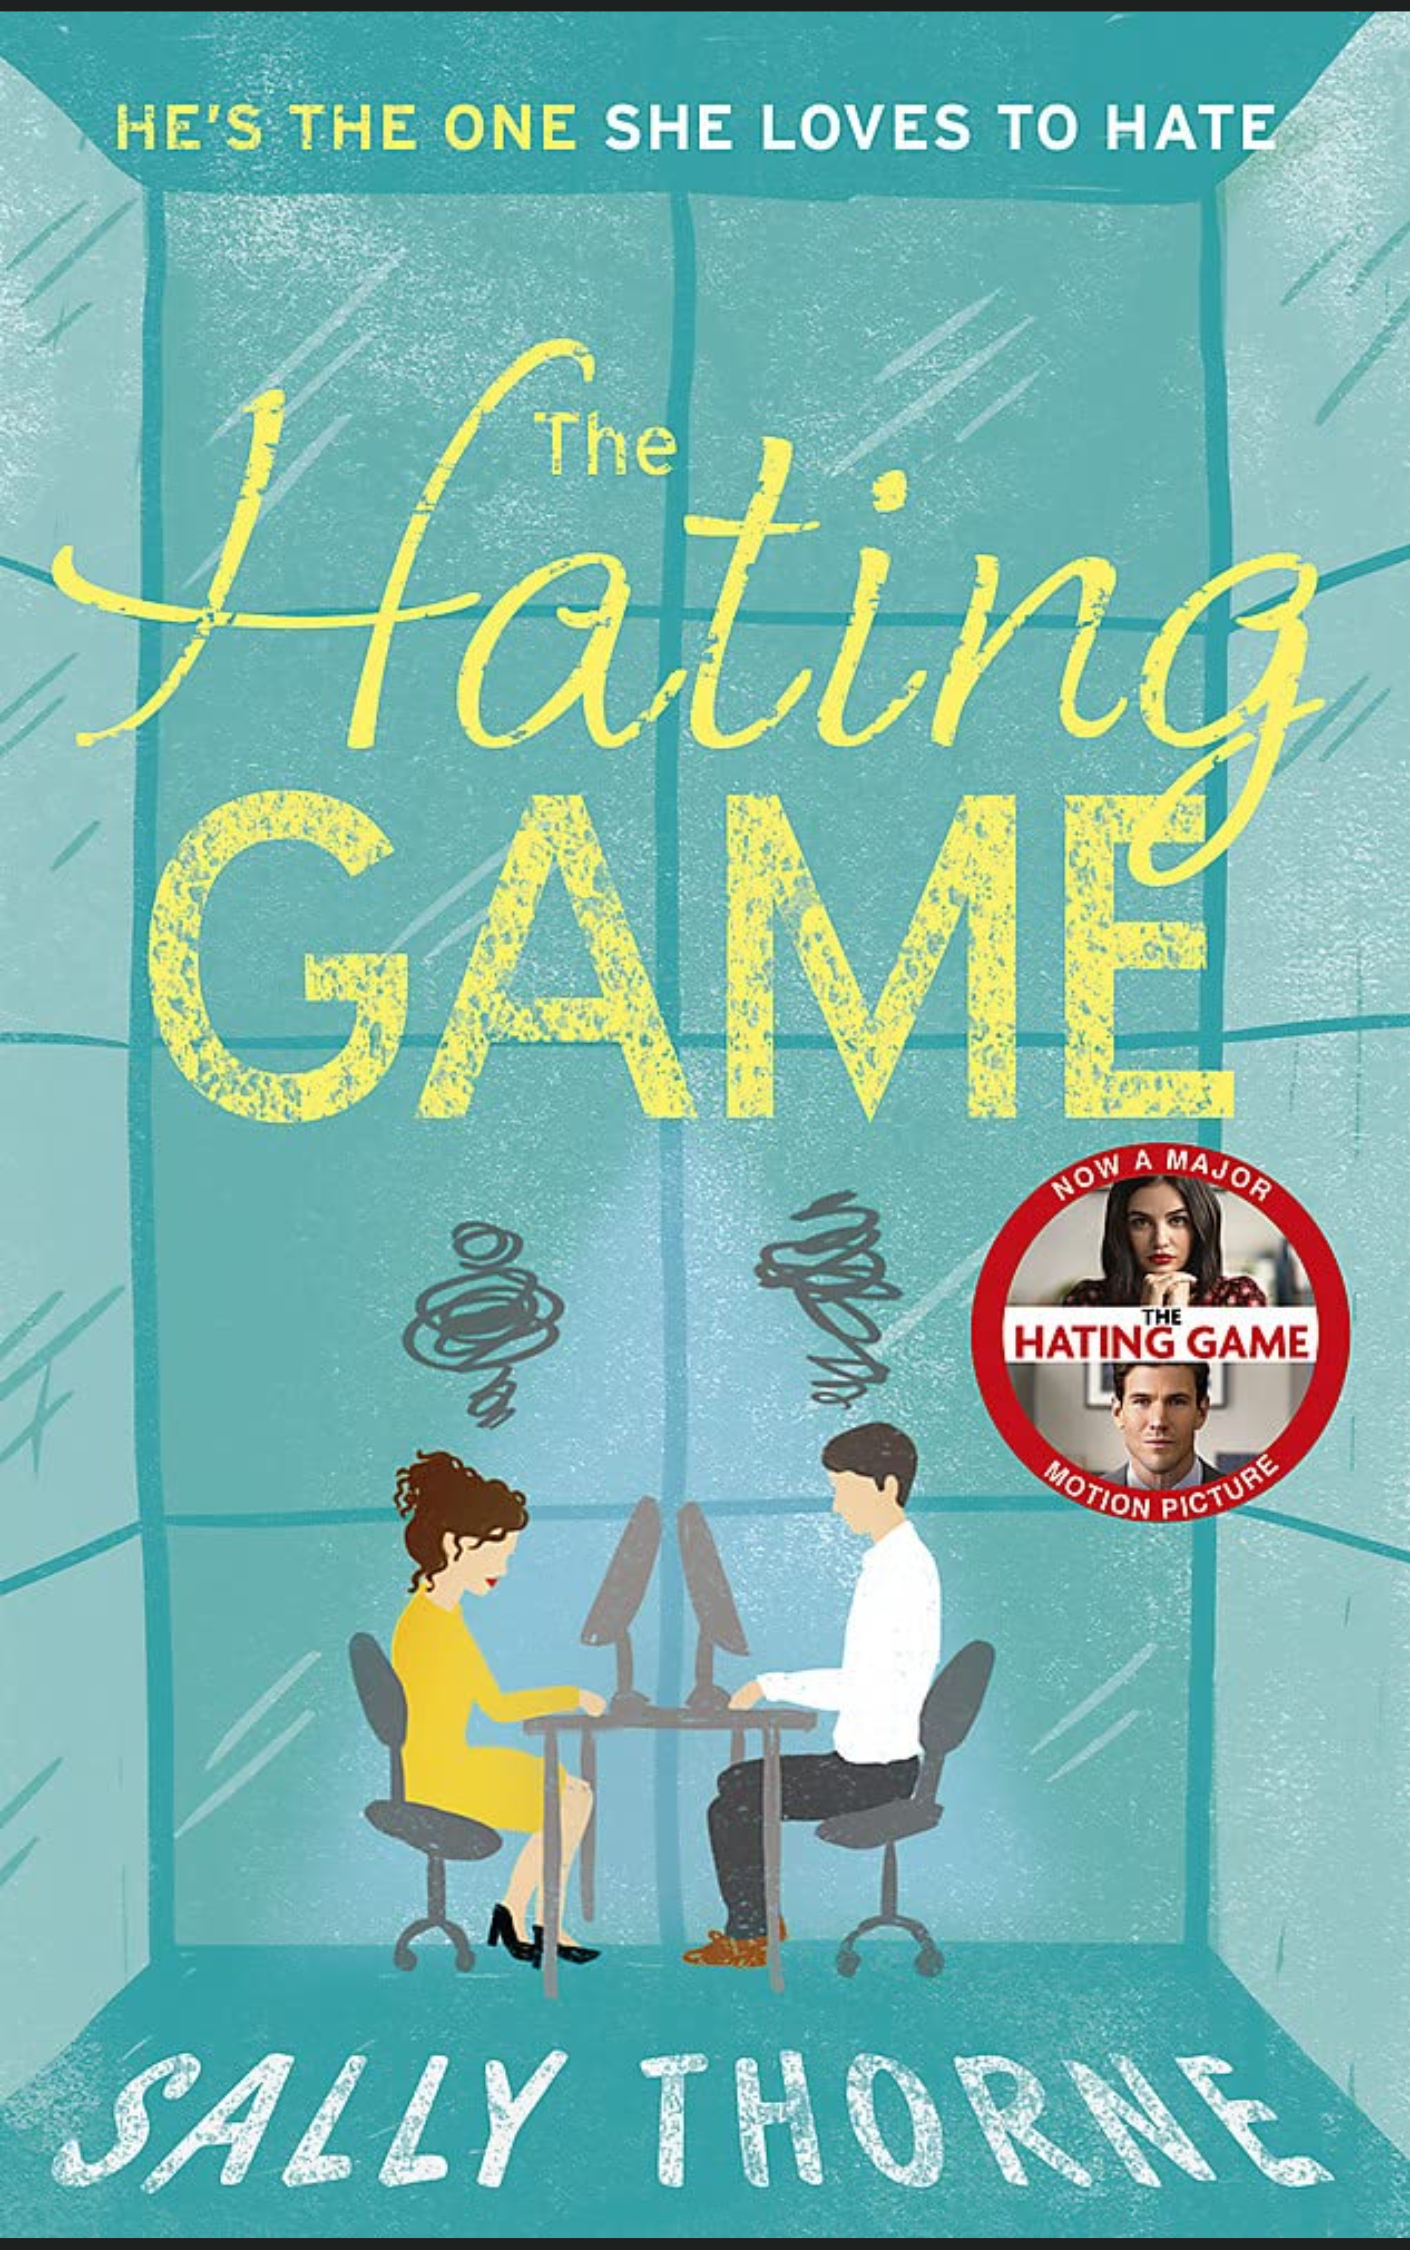 THE HATING GAME by SALLY THORNE